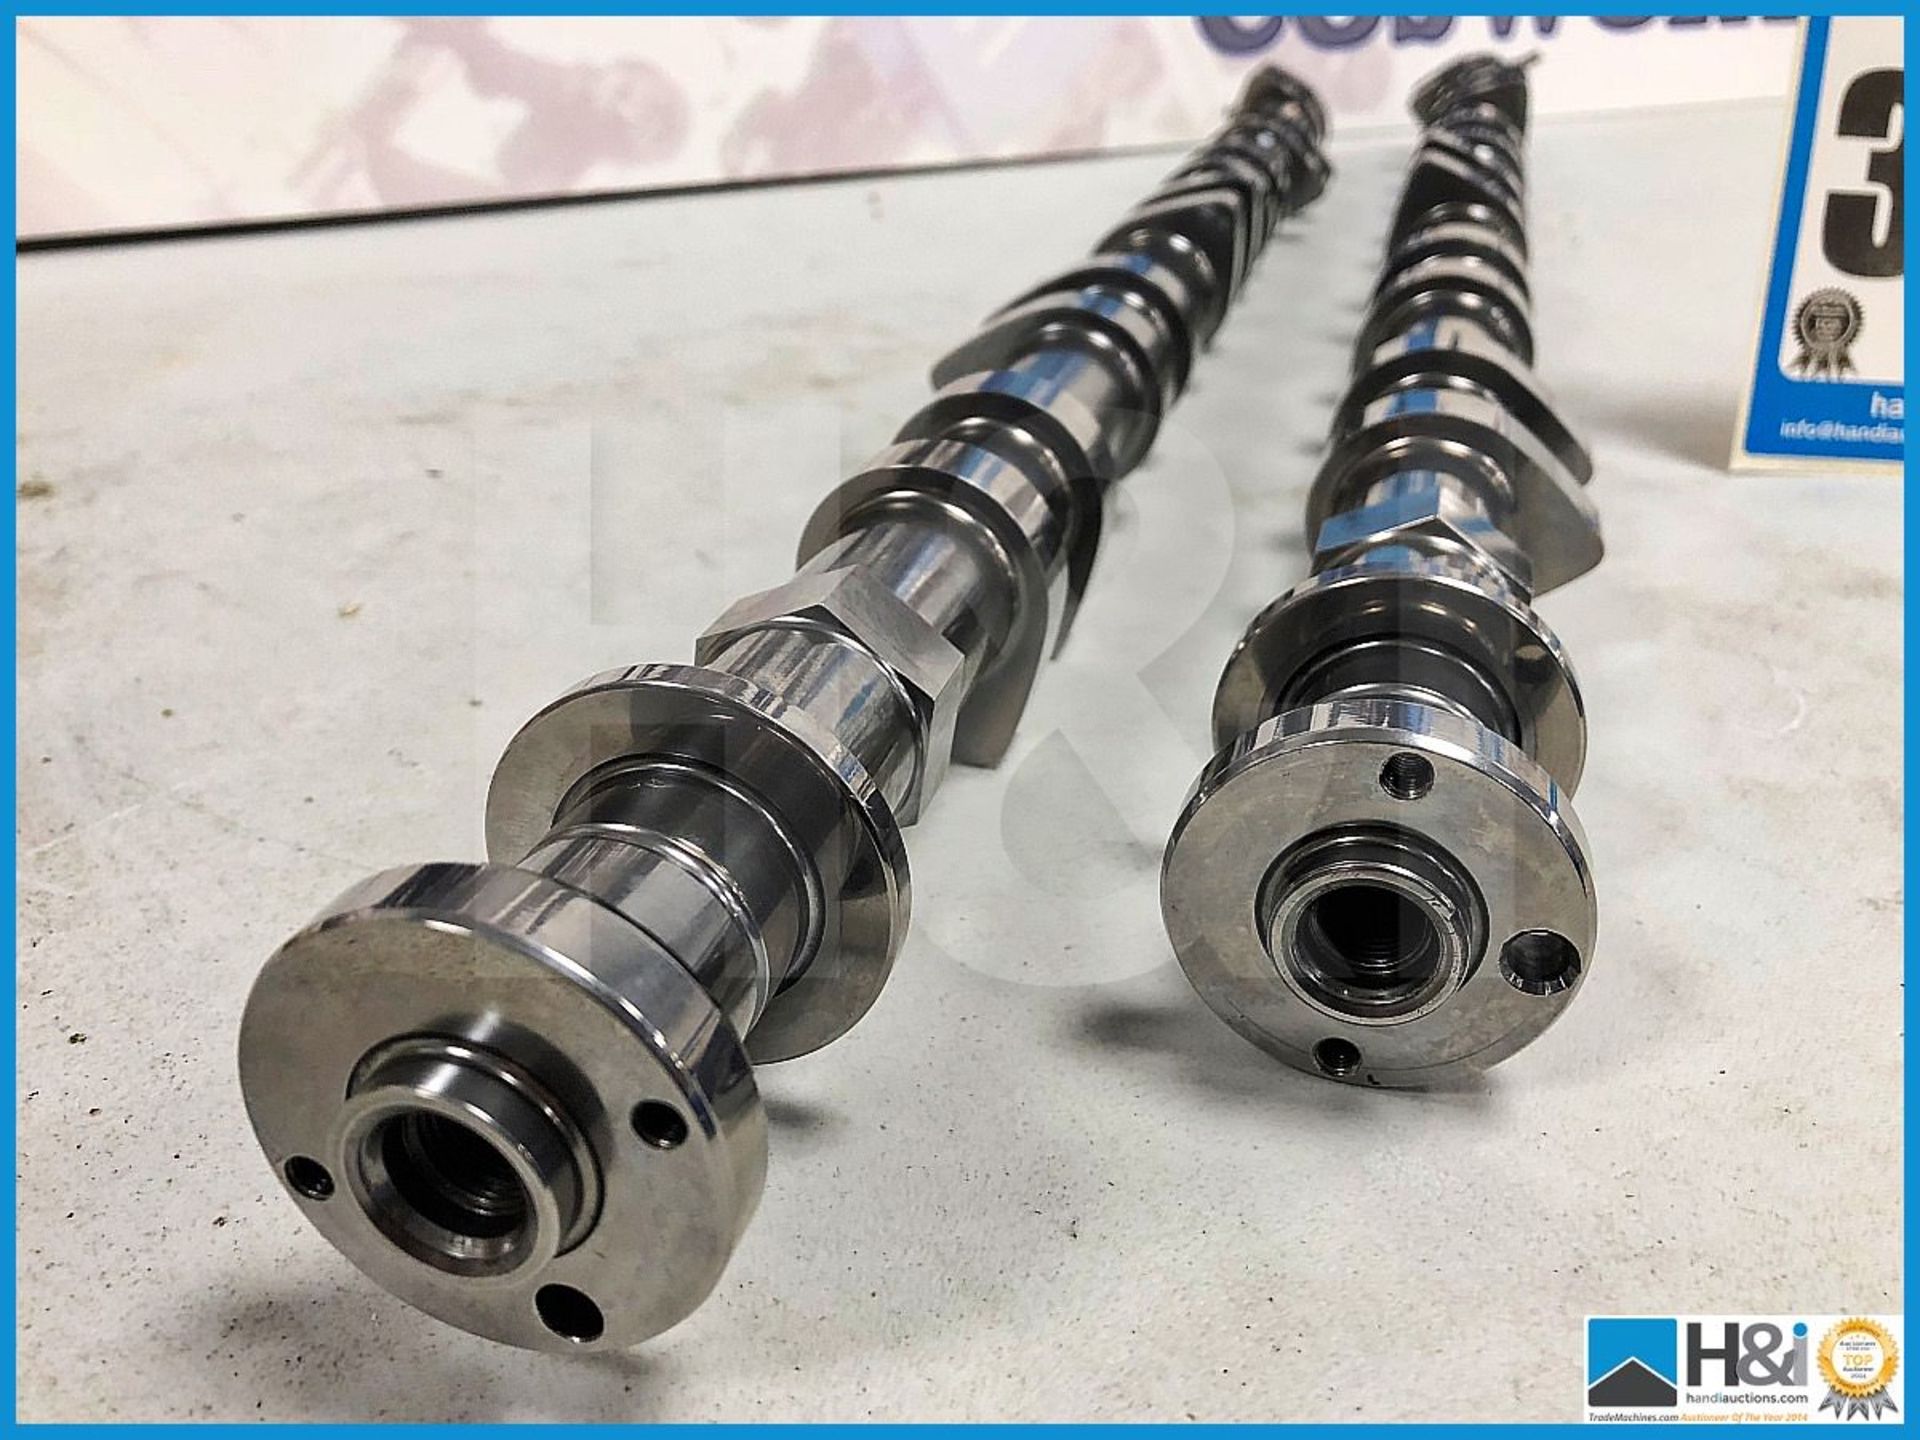 Cosworth JK RH and LH inlet camshafts AM18. Code: 20007562 and 20007563. Lot 259 & 260. RRP GBP 4,20 - Image 2 of 4